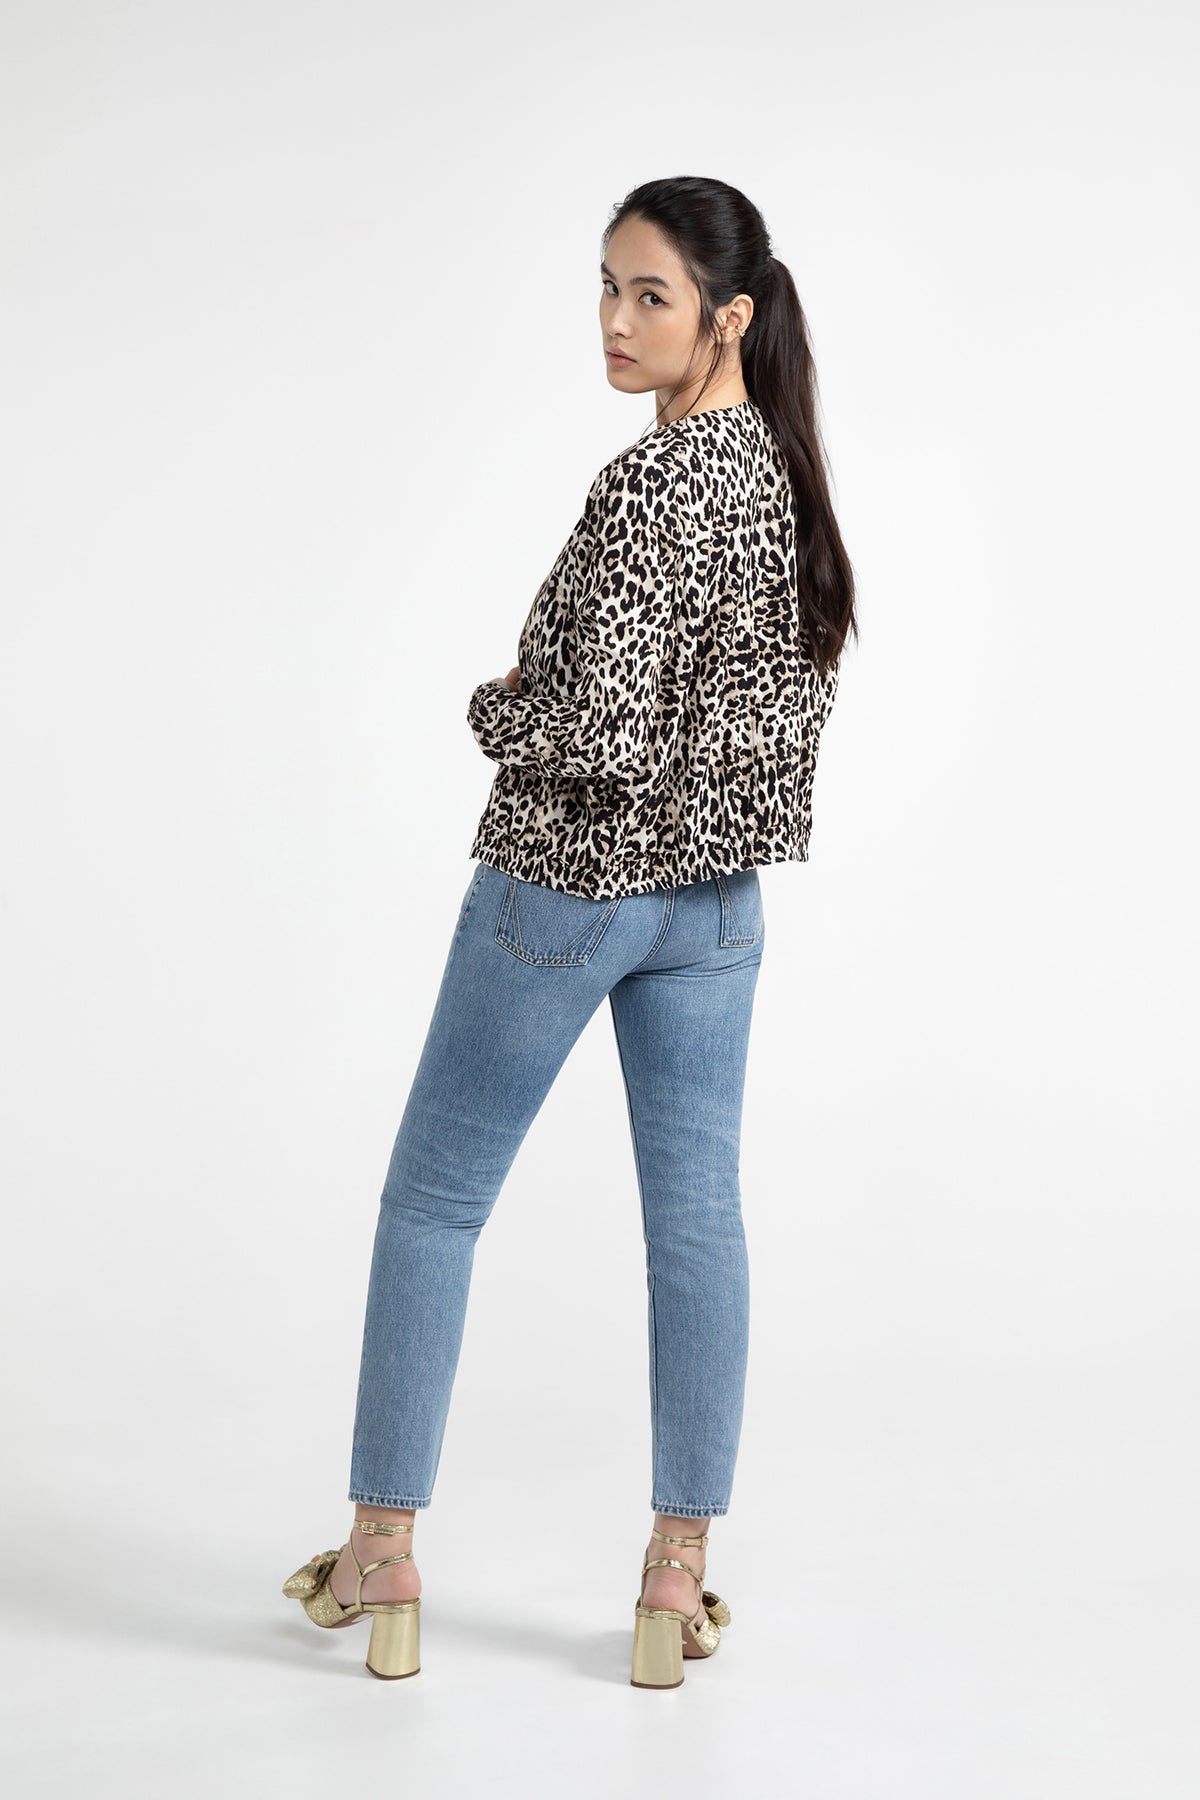 Blouson BOCA in animal print by LOVJOI made from Ecovero™